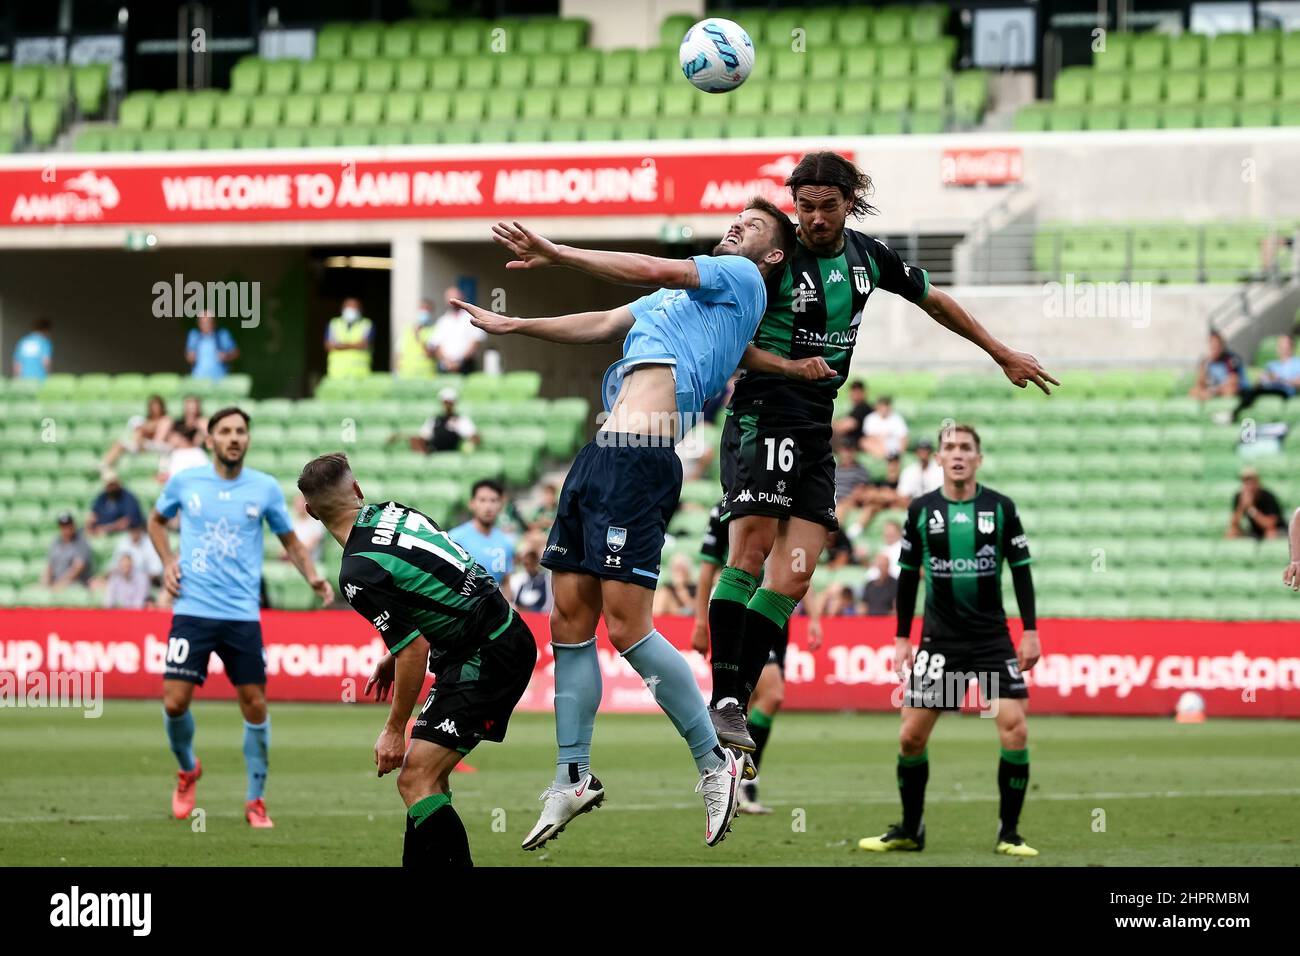 Melbourne, Australia, 23 February, 2022. James Donachie of Sydney FC heads the ball ahead of Rene Krhin of Western United during the A-League soccer match between Western United and Sydney FC at AAMI Park on February 23, 2022 in Melbourne, Australia. Credit: Dave Hewison/Speed Media/Alamy Live News Stock Photo